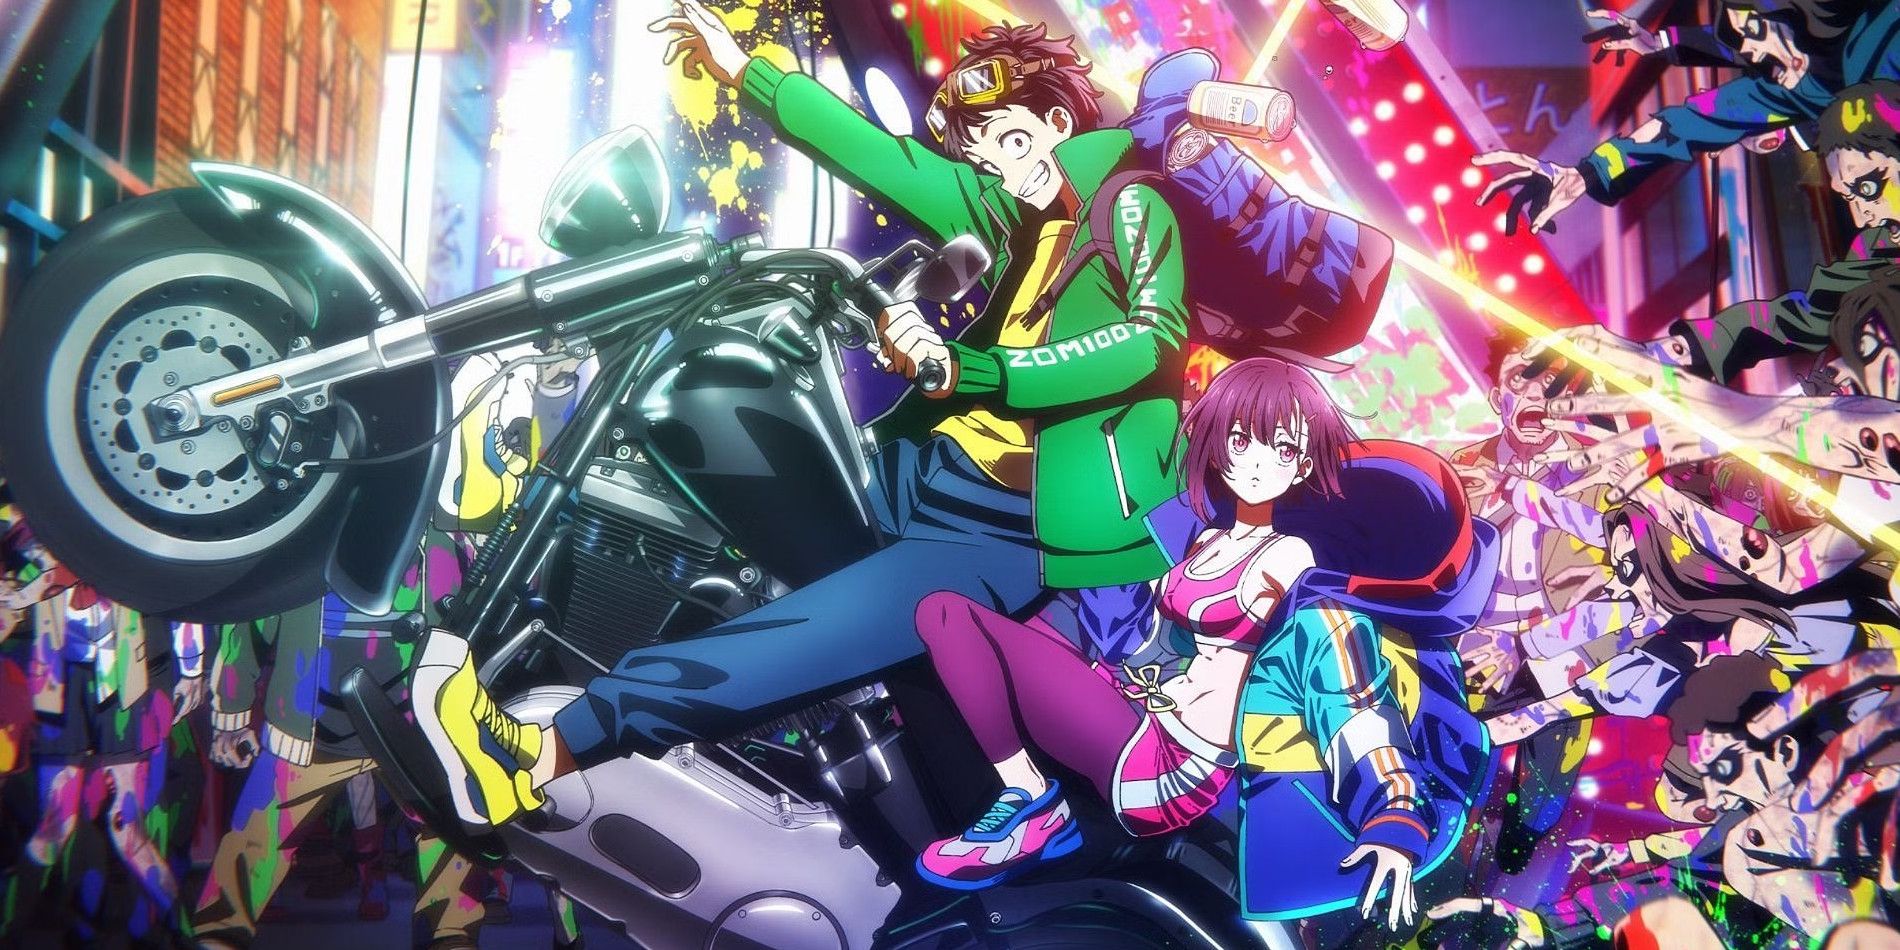 Akira and Shizuka on a motorcycle surrounded by zombies from Zom 100: Bucket List of the Dead